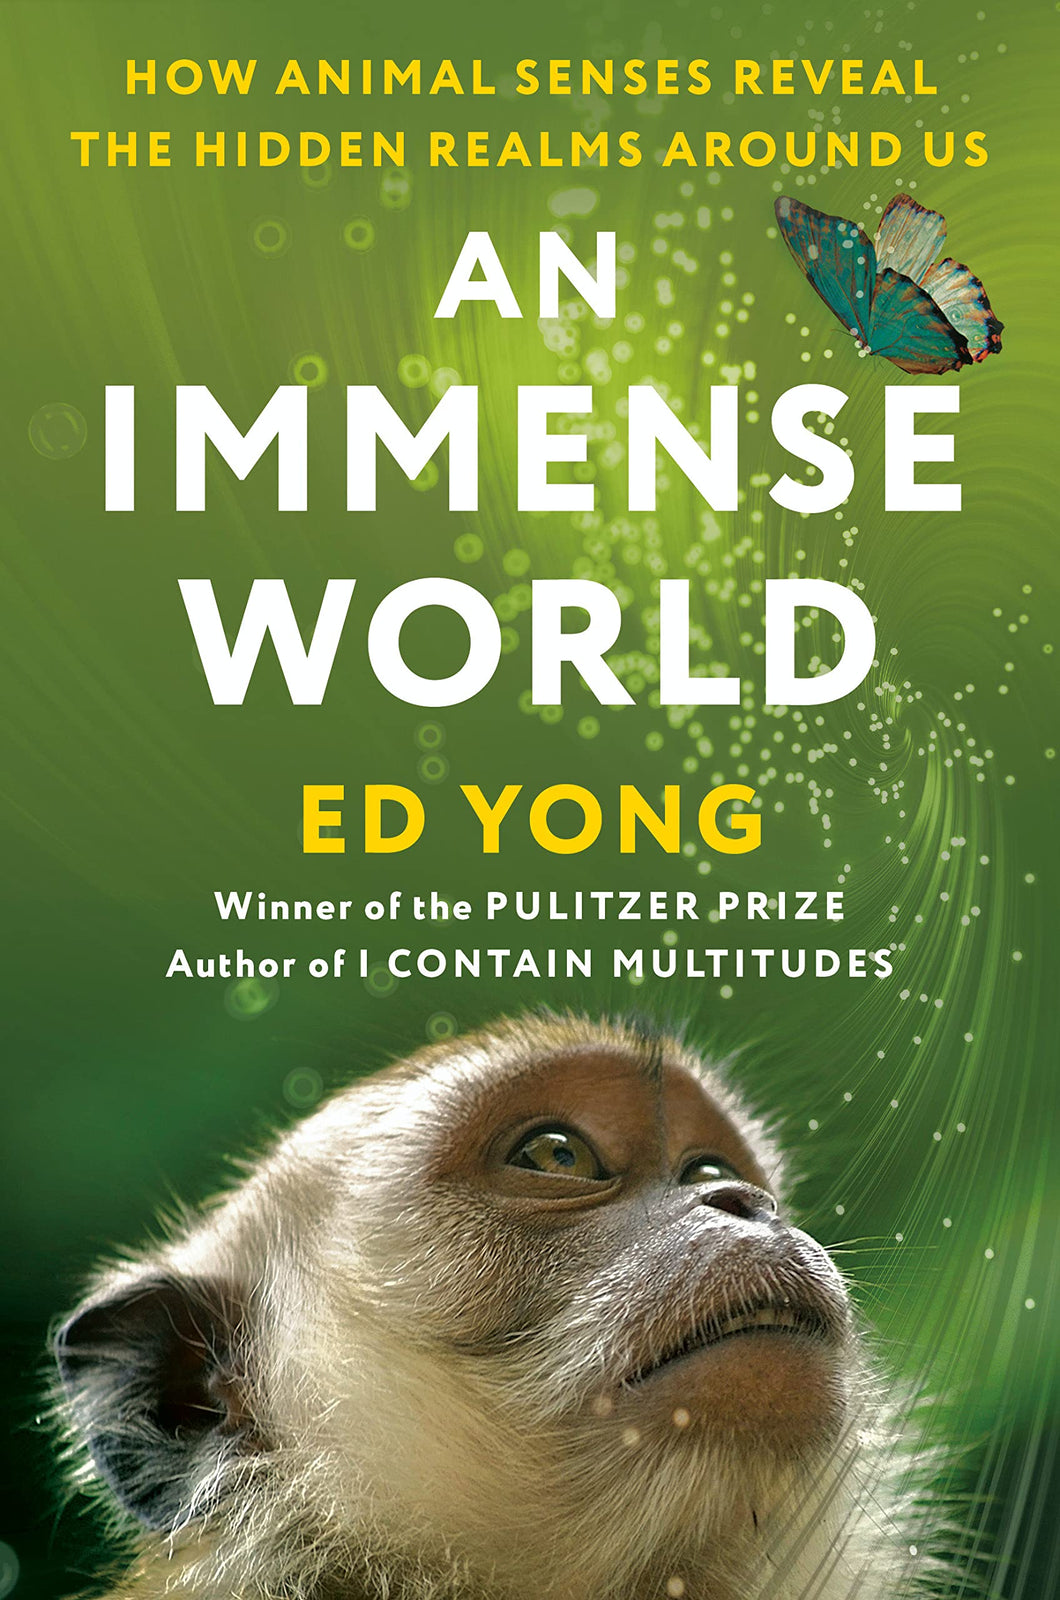 An Immense World: How Animal Senses Reveal The Hidden Realms Around Us [Ed Yong]